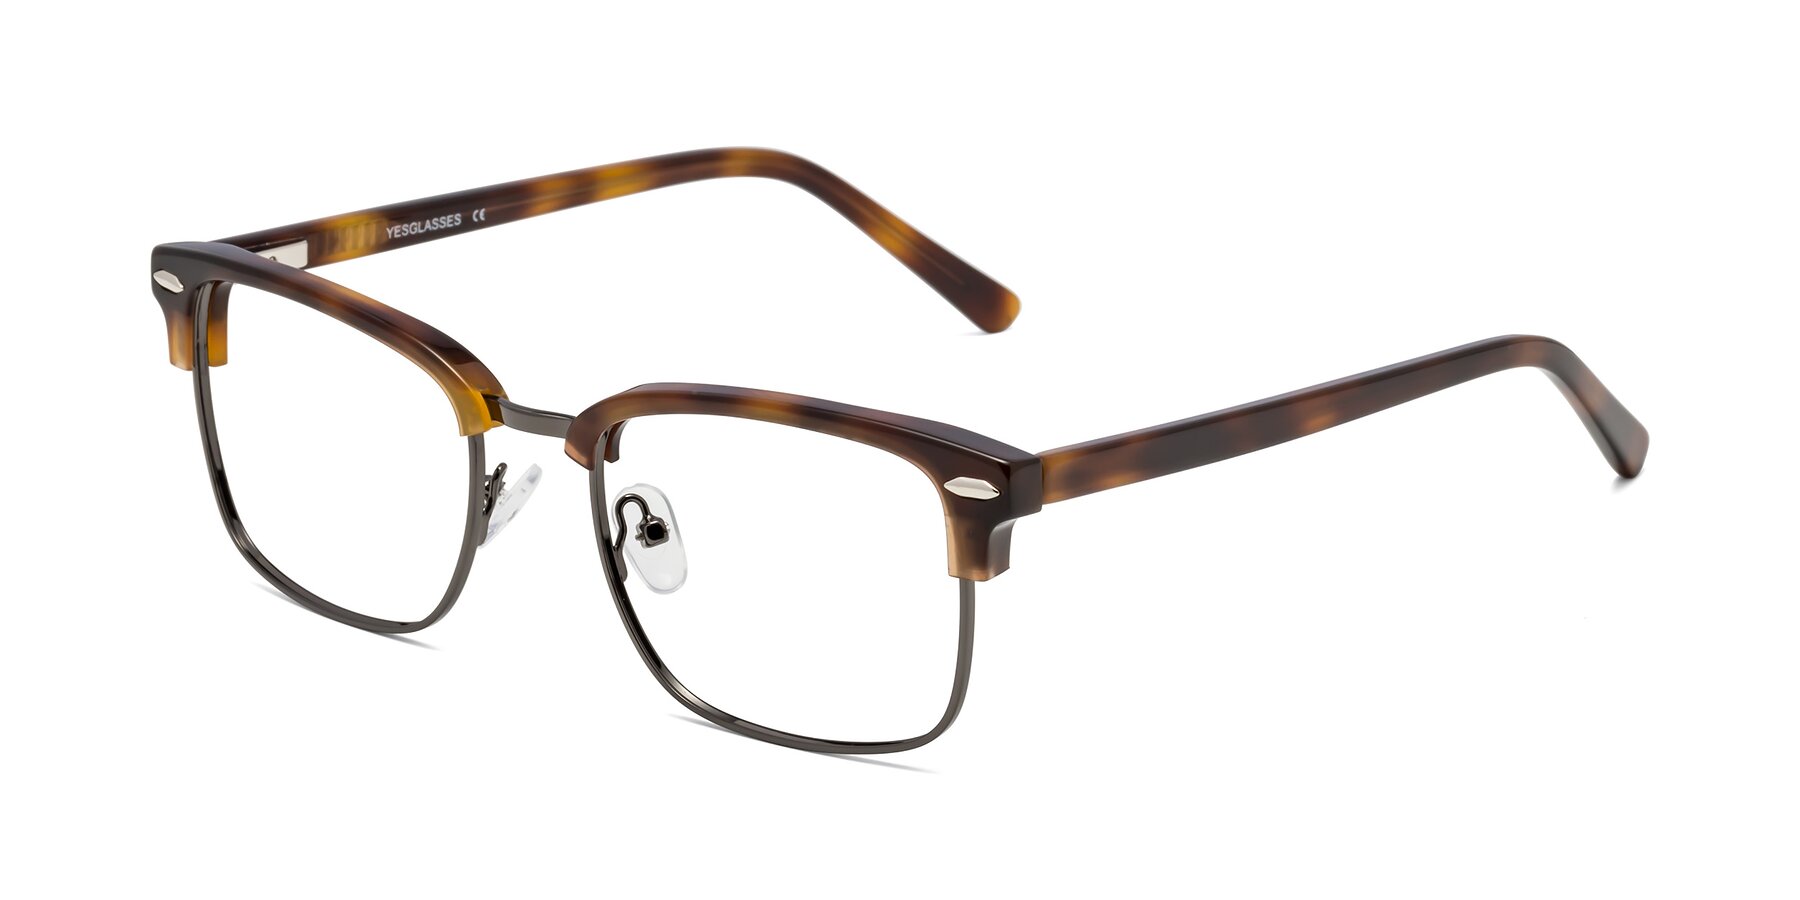 Angle of 17464 in Tortoise/ Gunmetal with Clear Blue Light Blocking Lenses